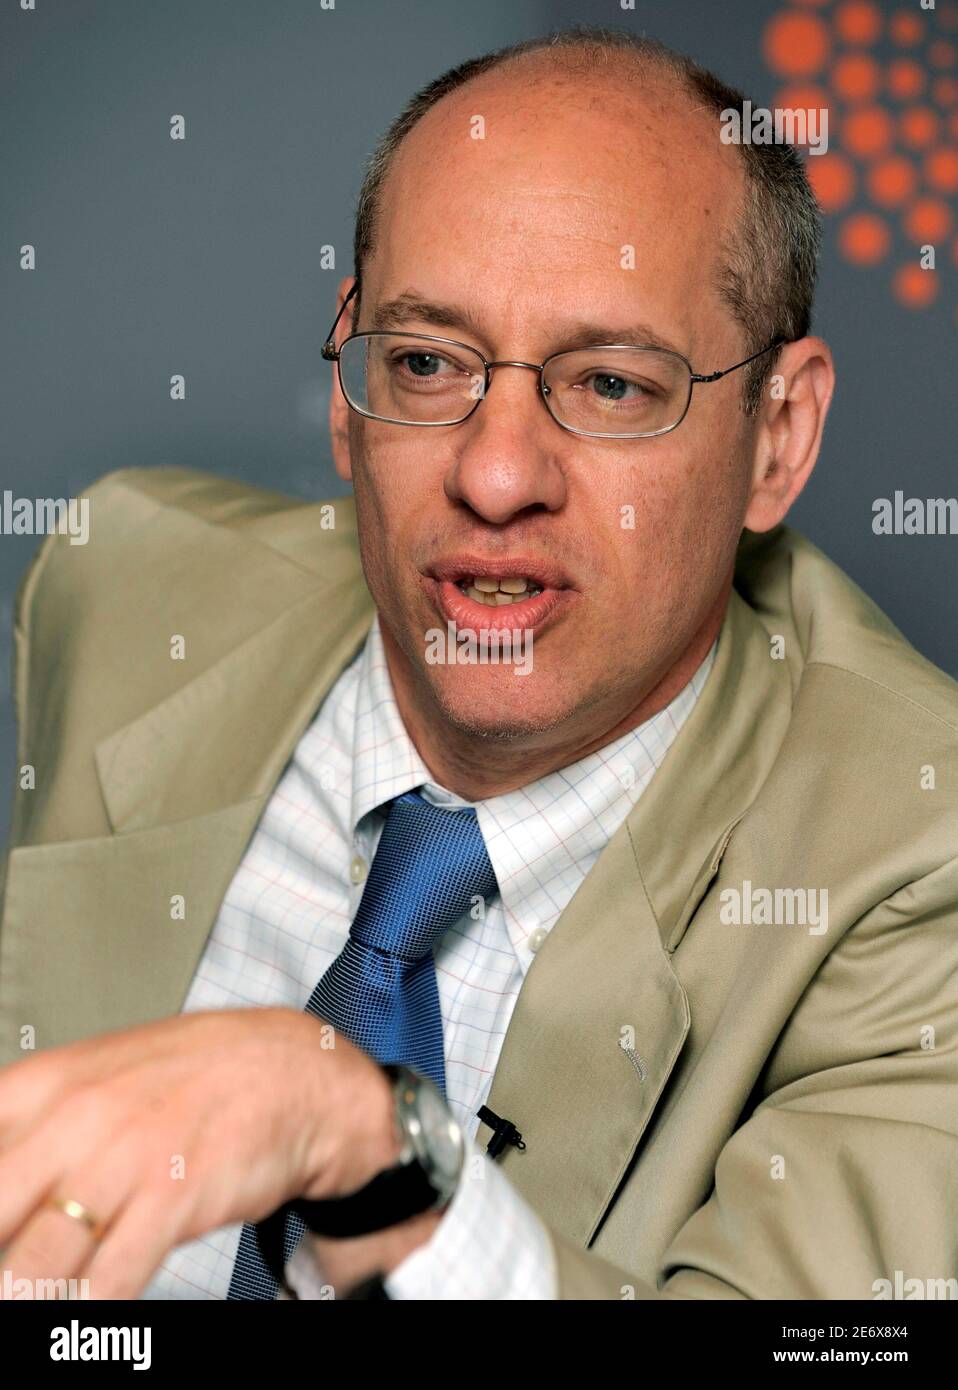 Federal Trade Commission (FTC) Chairman Jon Leibowitz briefs reporters on his agency's plans for consumer protection on such issues as the consolidation of the pharmaceutical industry and mortgage fraud, as well as pending Congressional legislation, at the Reuters Financial Regulation Summit  in Washington, April 27, 2009.   REUTERS/Mike Theiler   (UNITED STATES POLITICS BUSINESS) Stock Photo